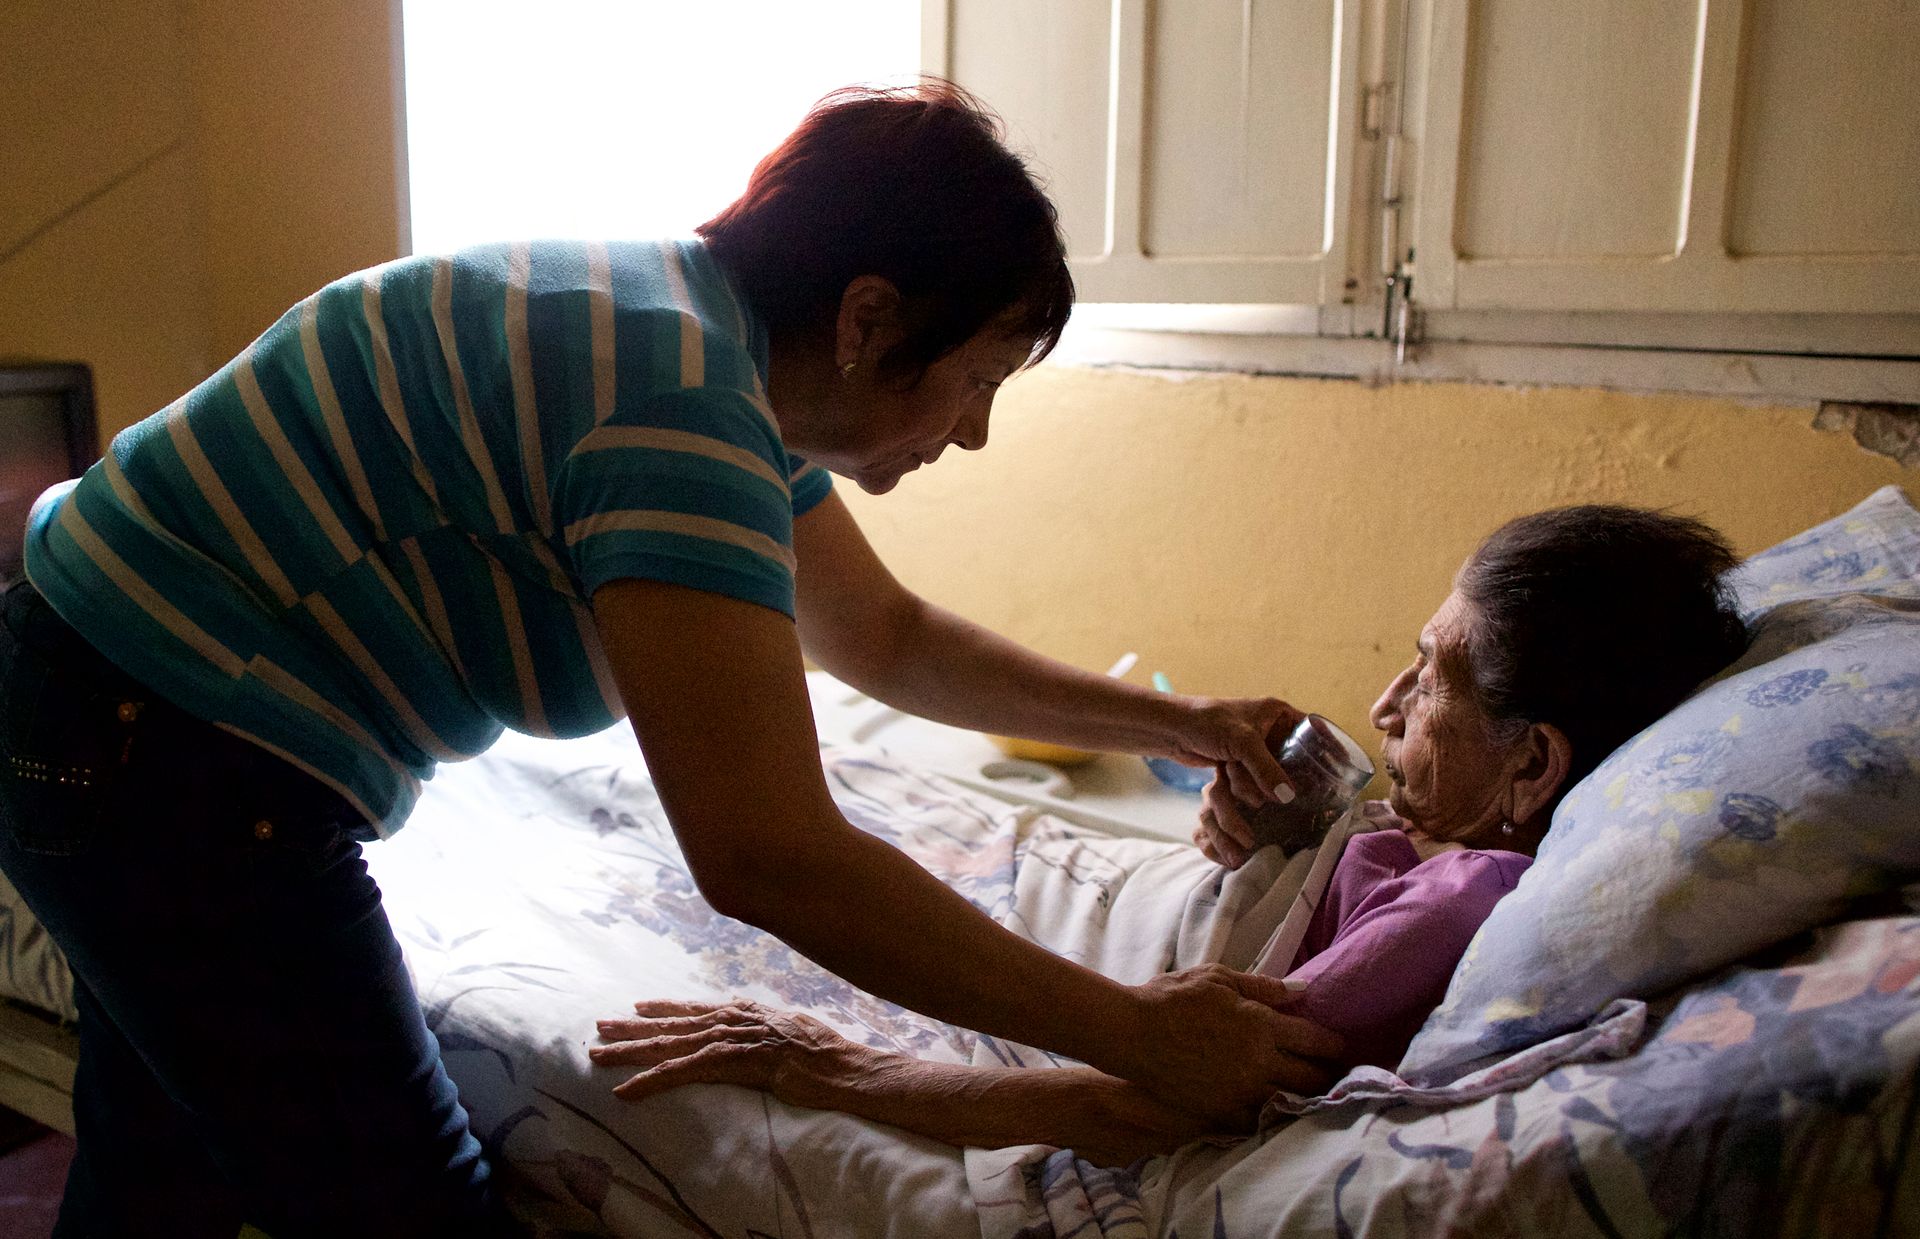 Although it was a challenge to leave her job and care for her sick mother and husband, Blanca did so willingly. “I wanted the best for them,” she said. “My mom deserved it, and my husband deserves it also.”